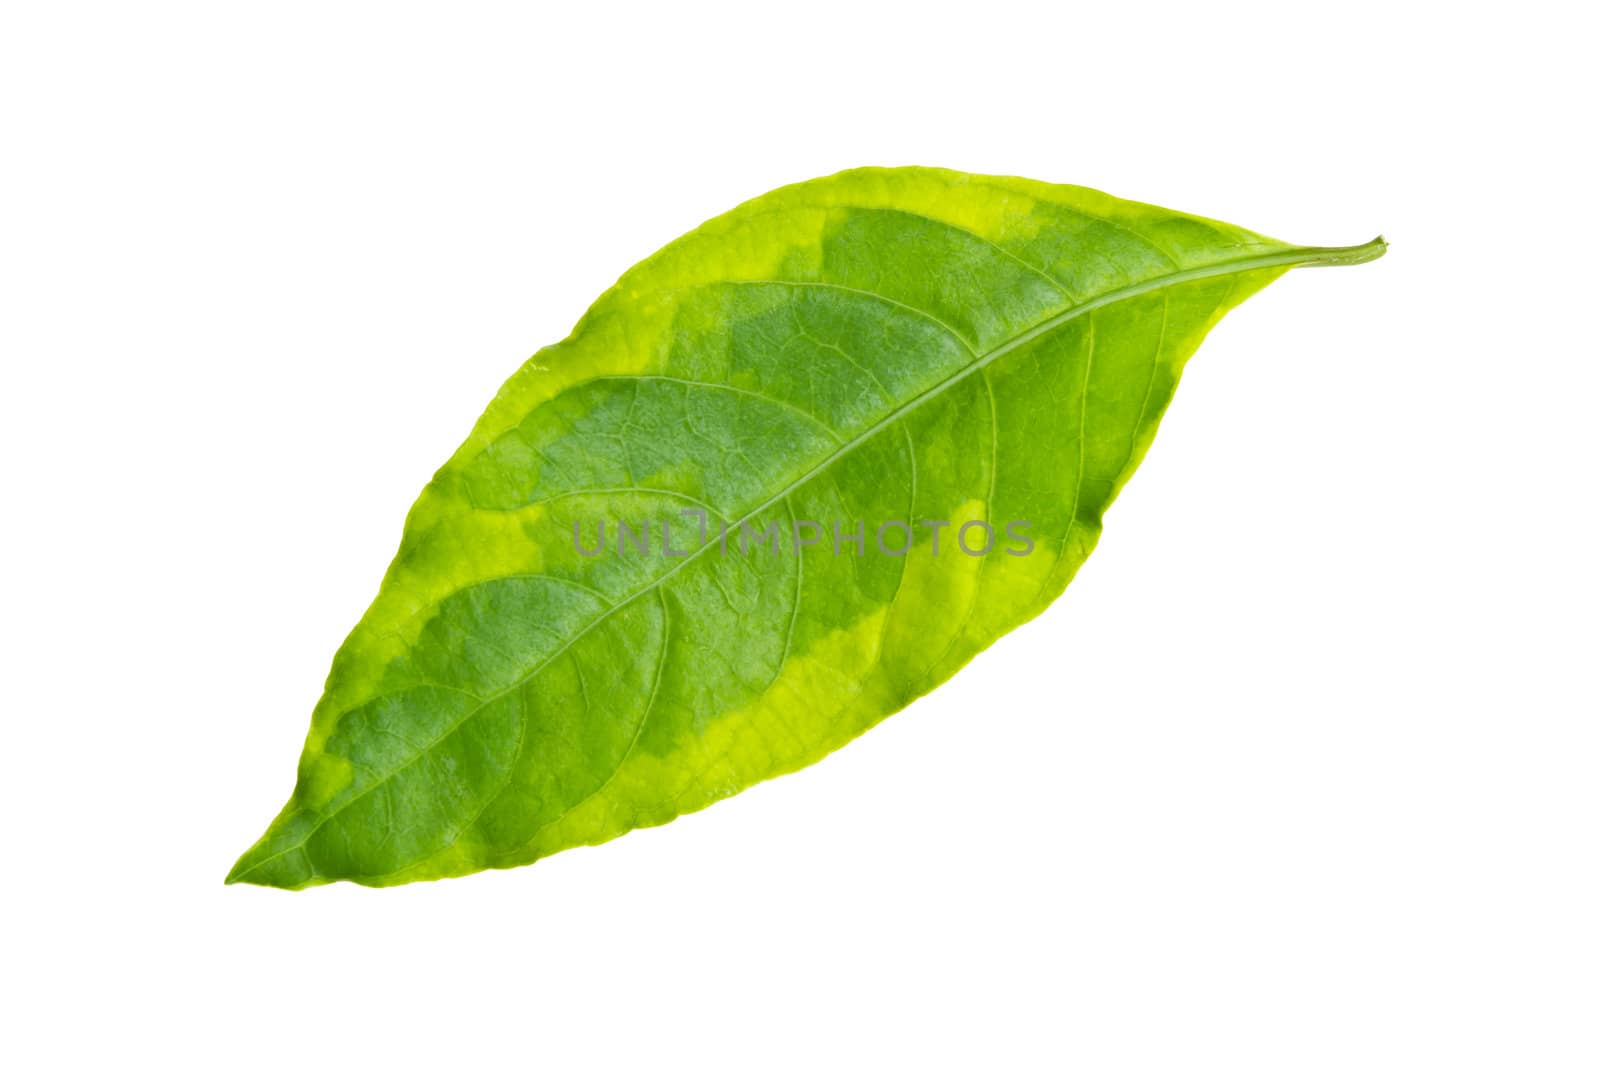 green leaf isolated